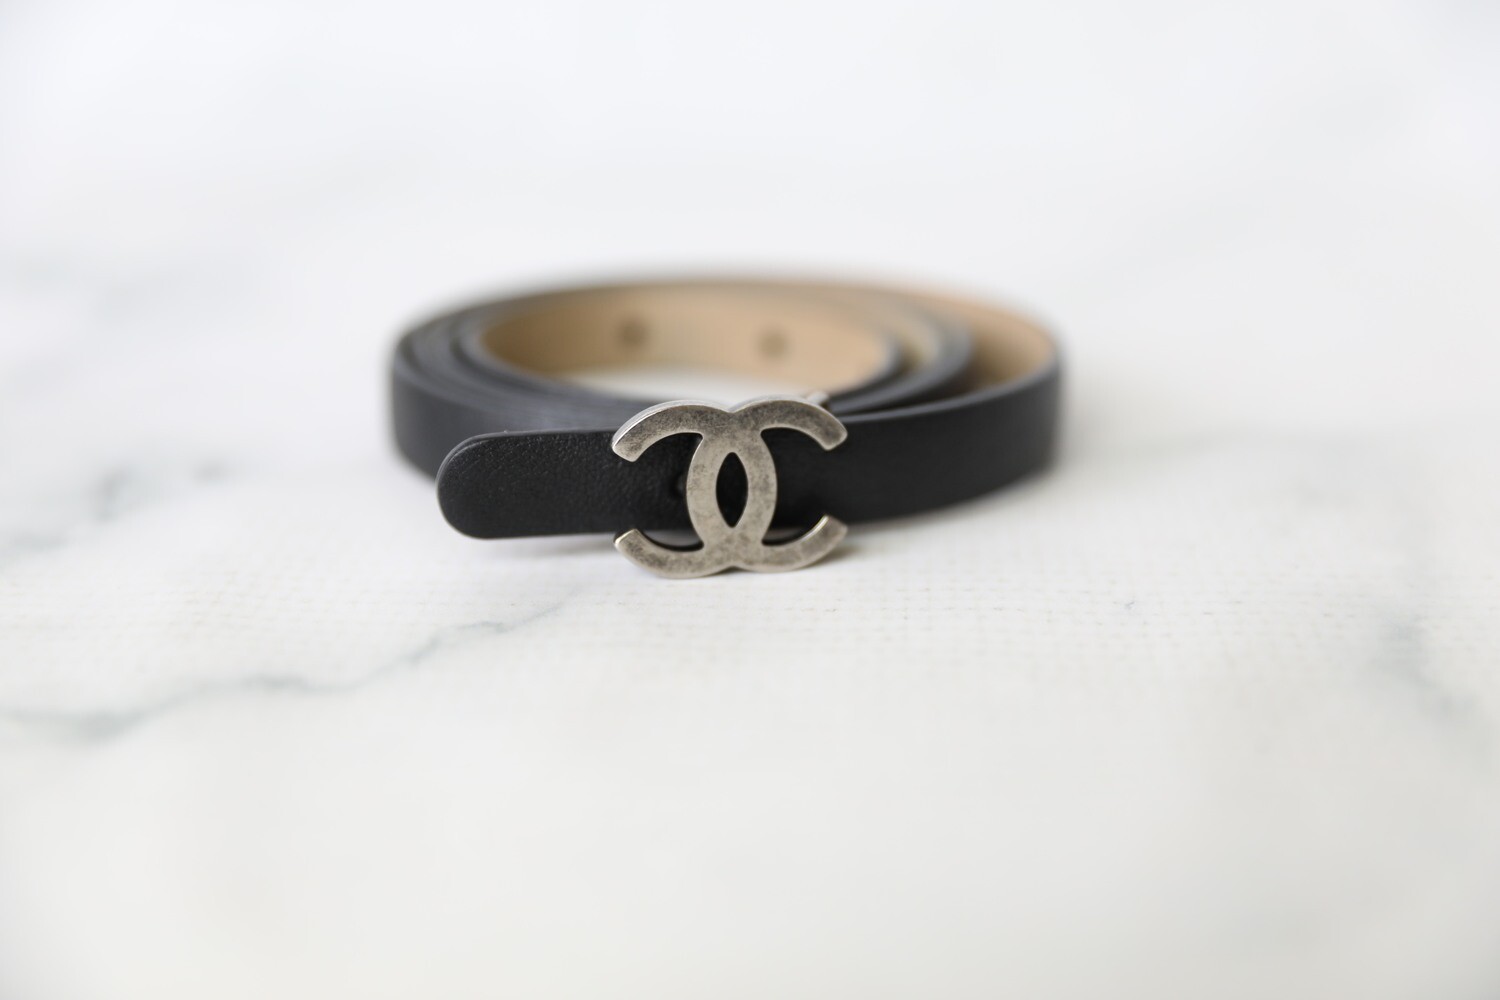 Leather belt Chanel Black size 85 cm in Leather - 30943598